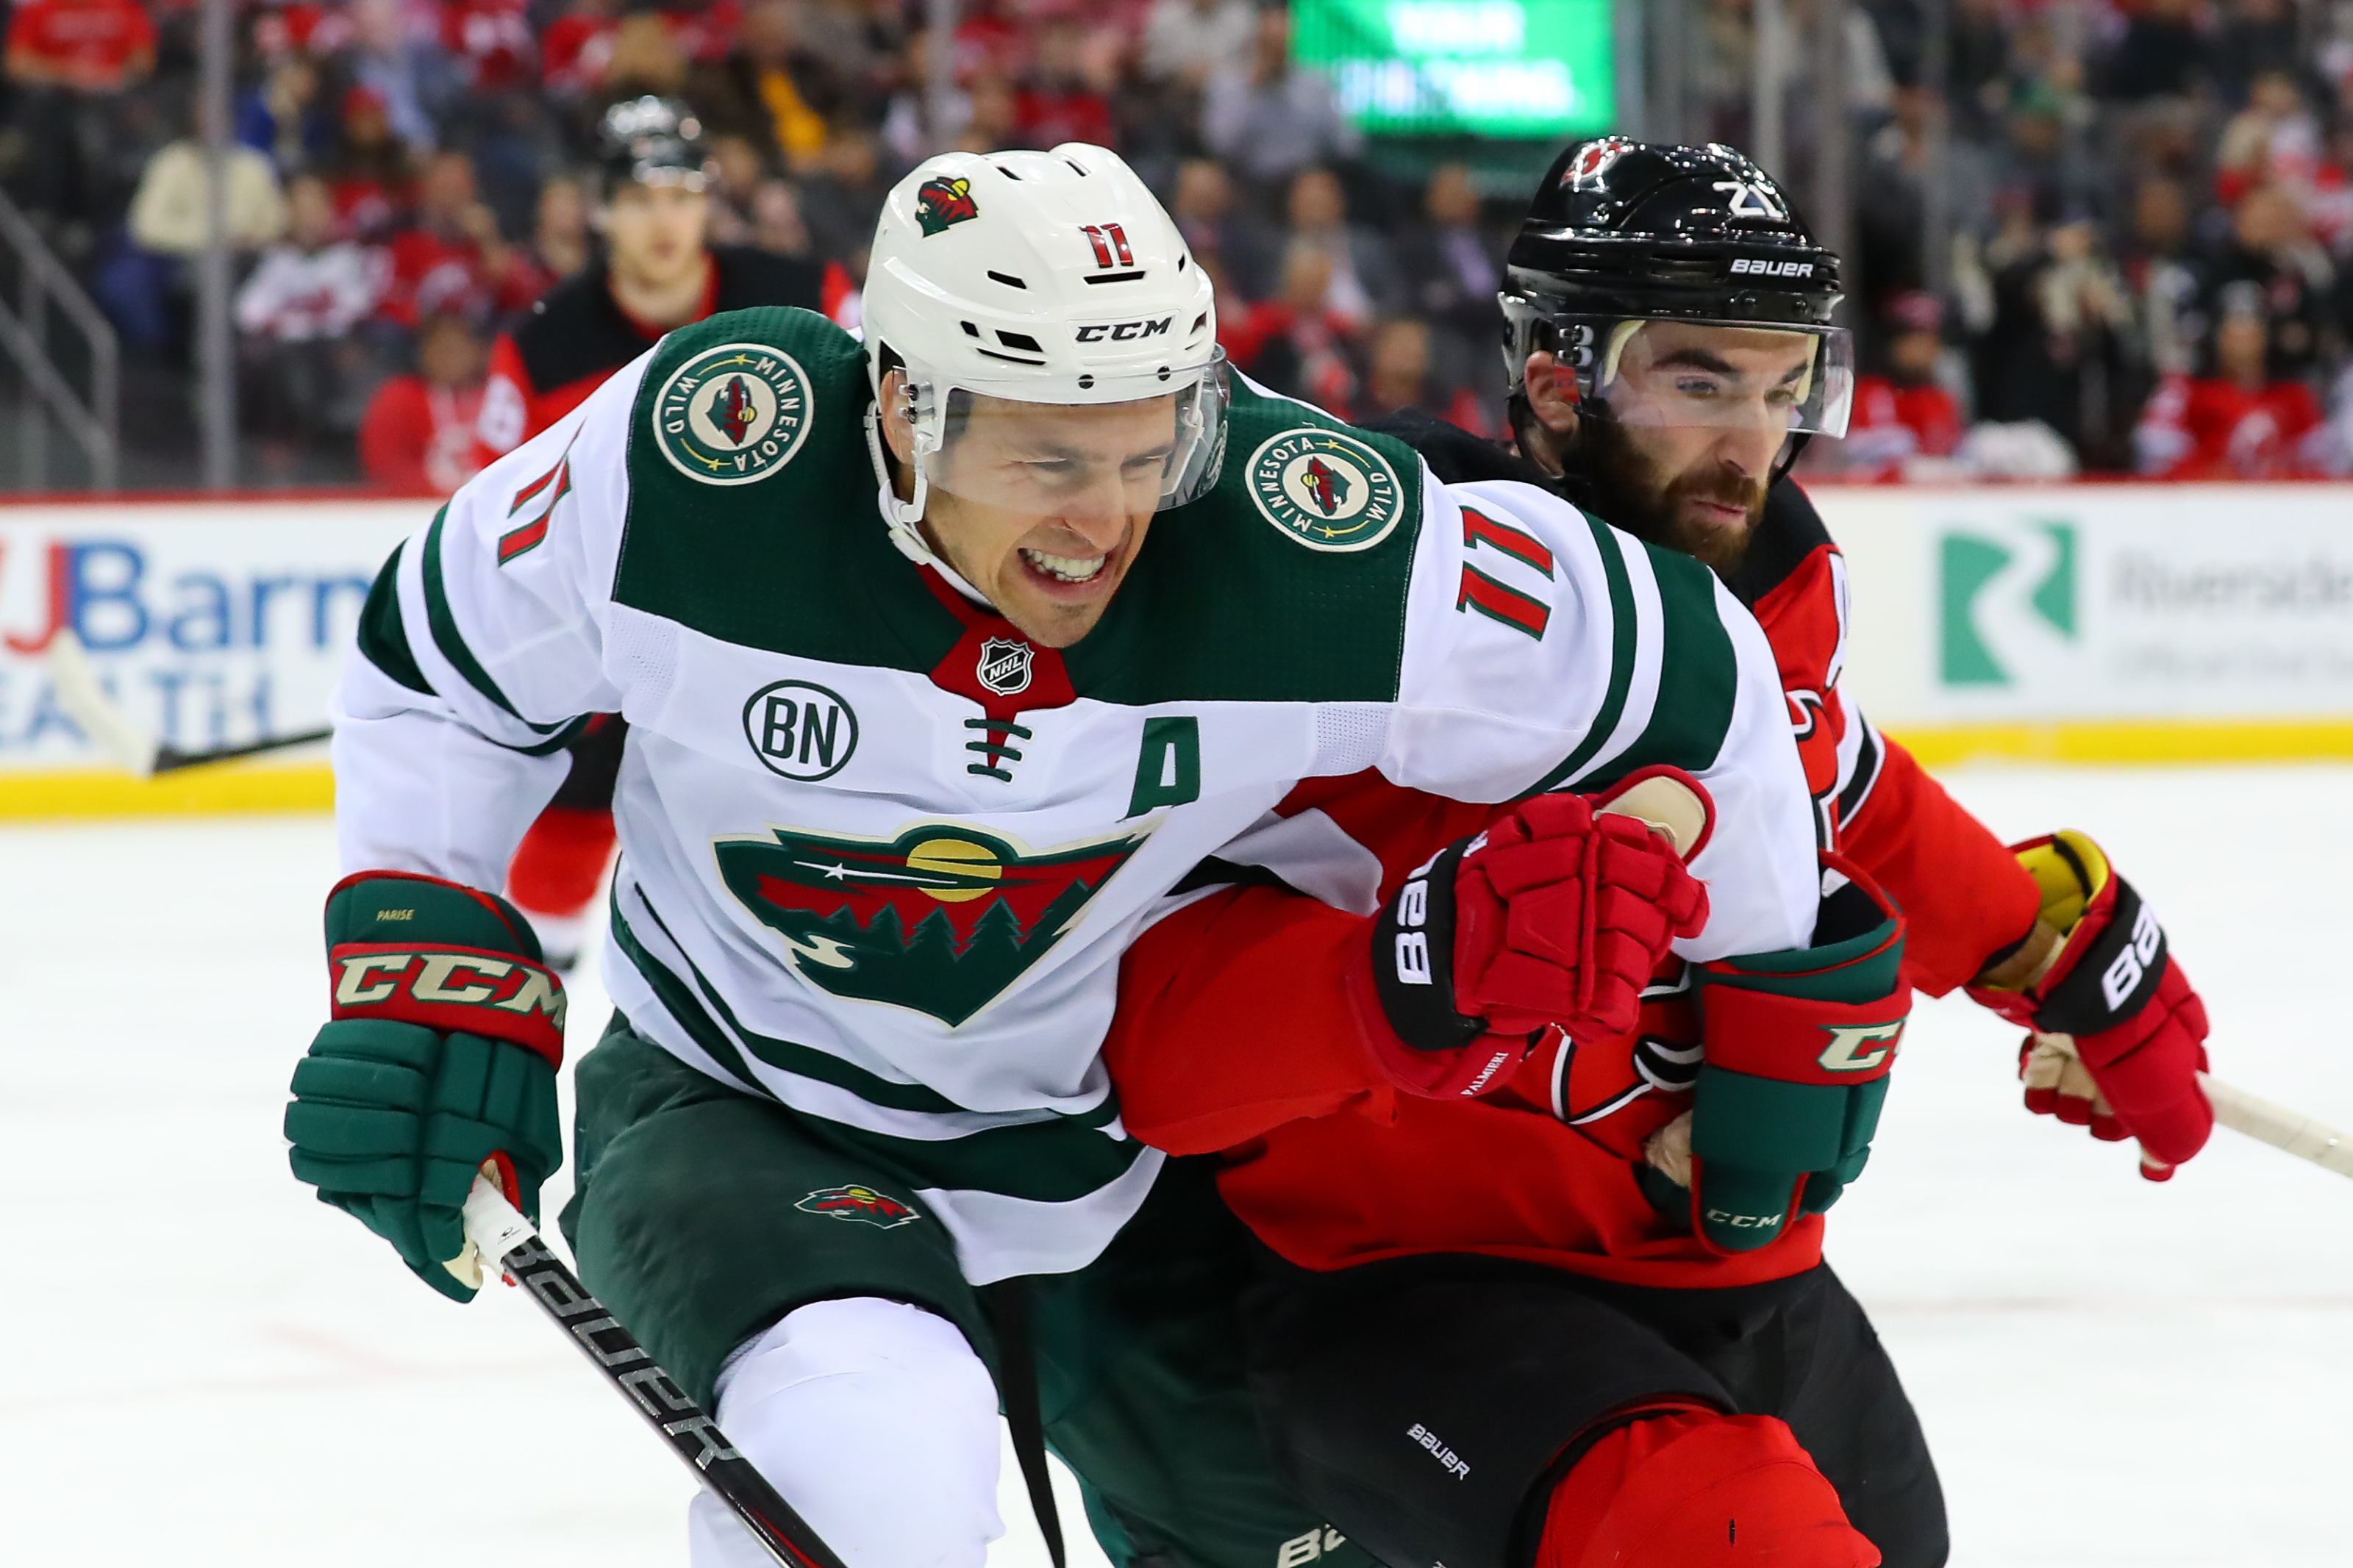 Zach Parise returning to Wild lineup Thursday after missing 14